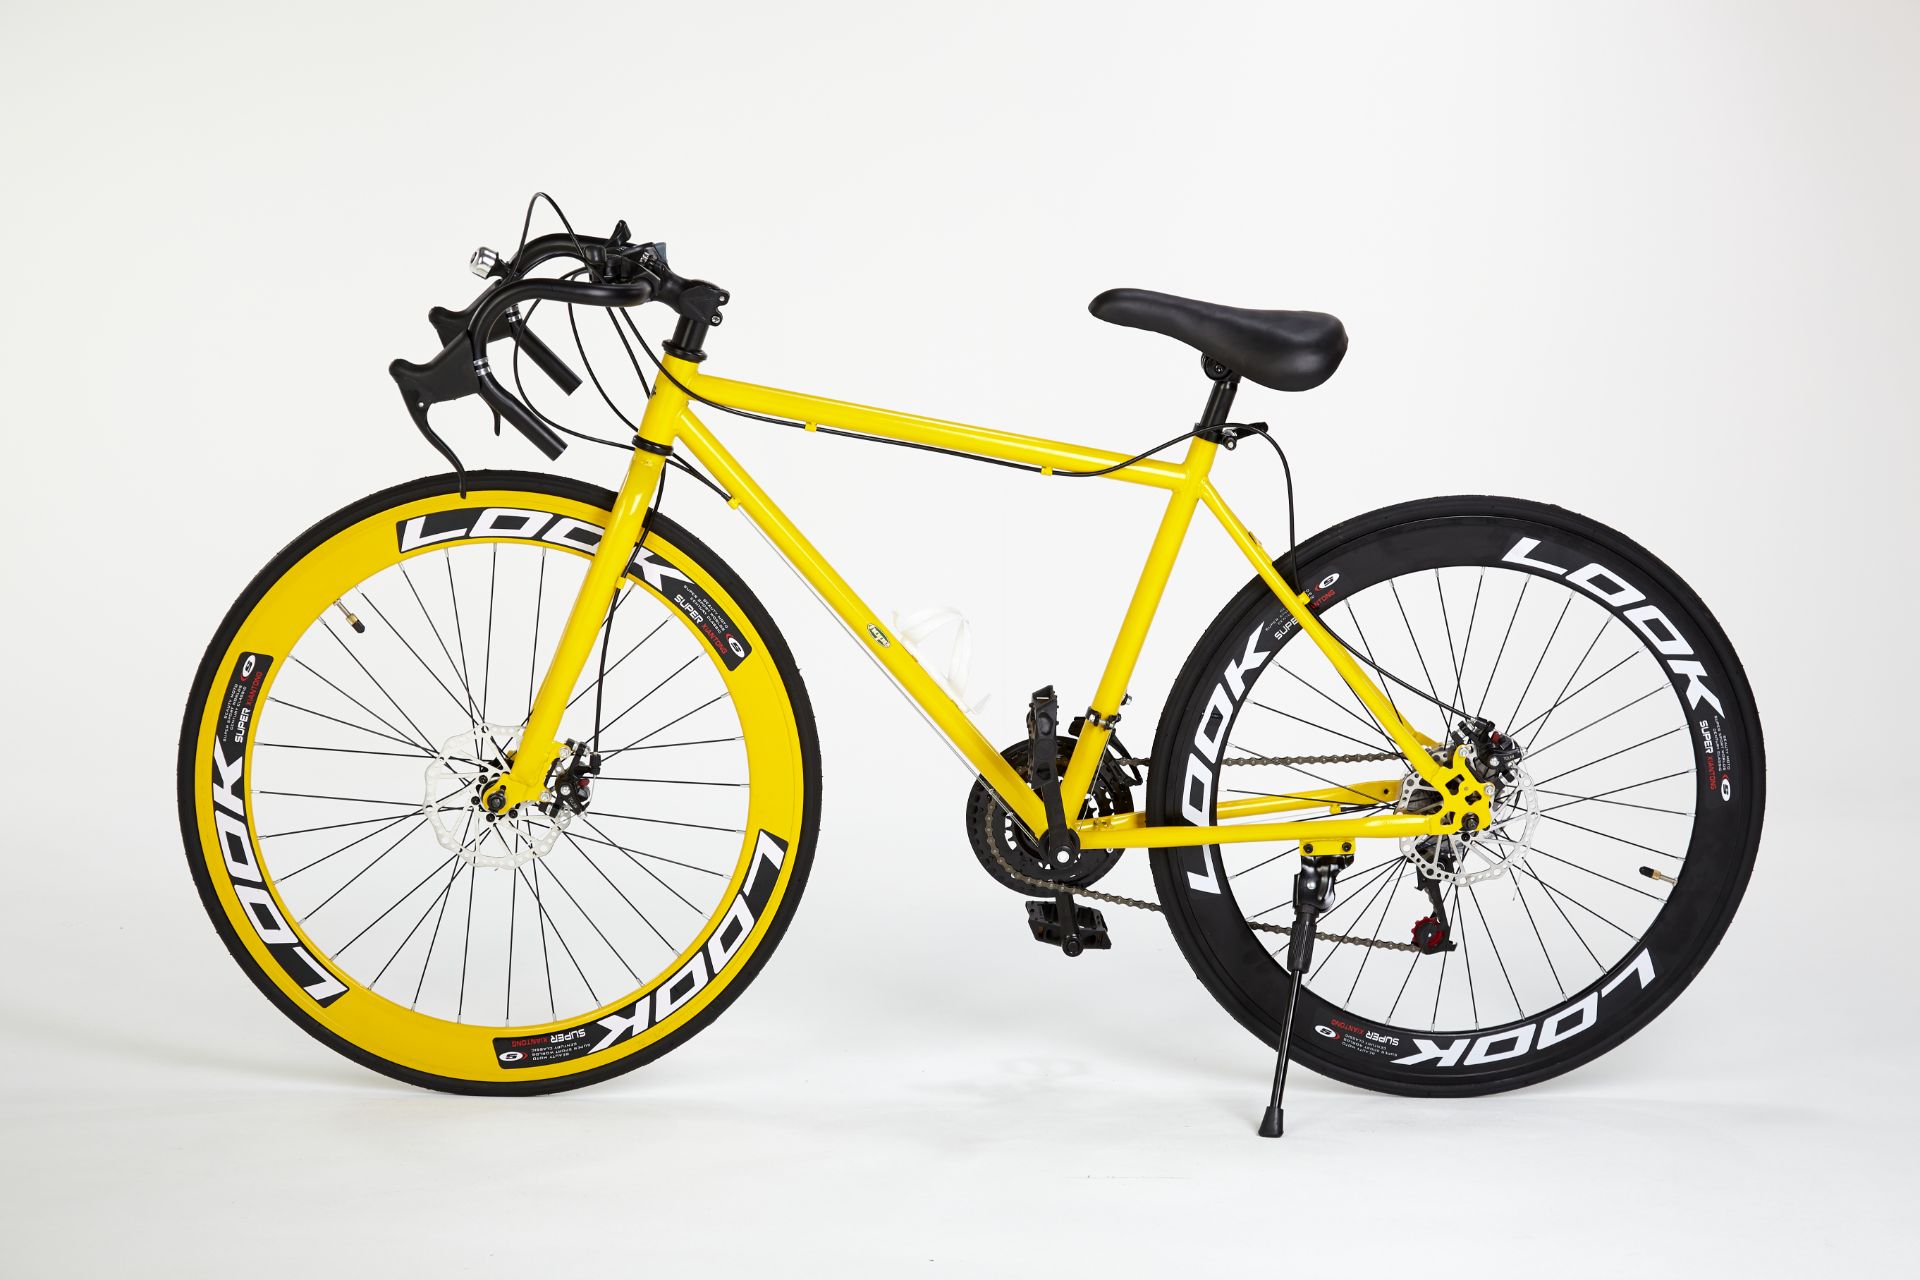 YELLOW STREET BIKE WITH 21 GREAR, BRAKE DISKS, KICK STAND, COOL THIN TYRES - Image 3 of 12